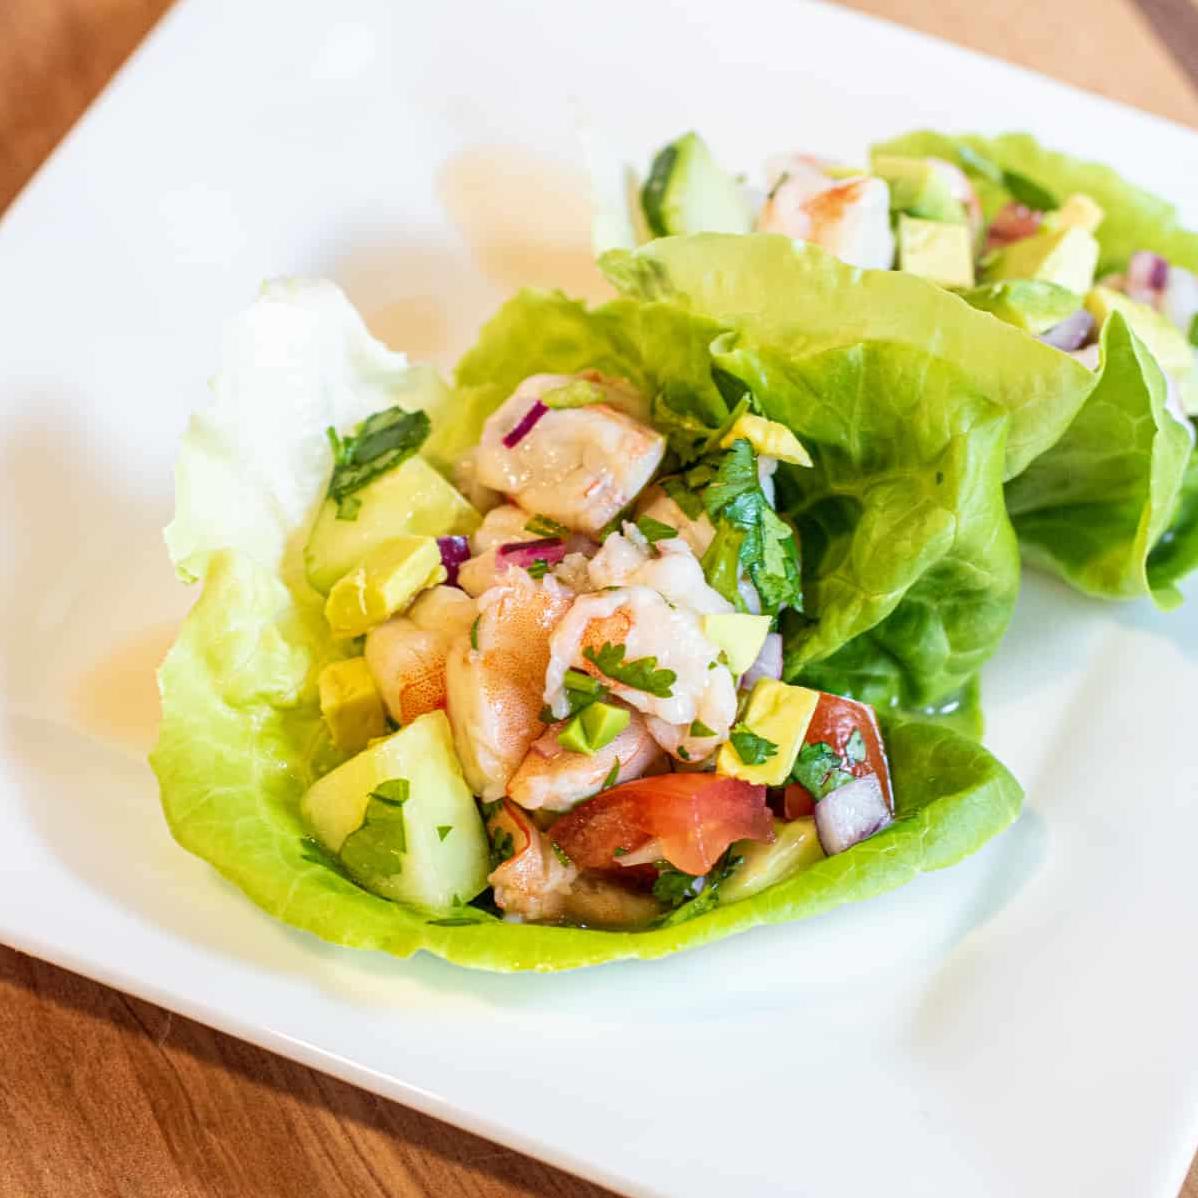  The combination of citrusy flavors and crispy lettuce leaves will awaken your taste buds.